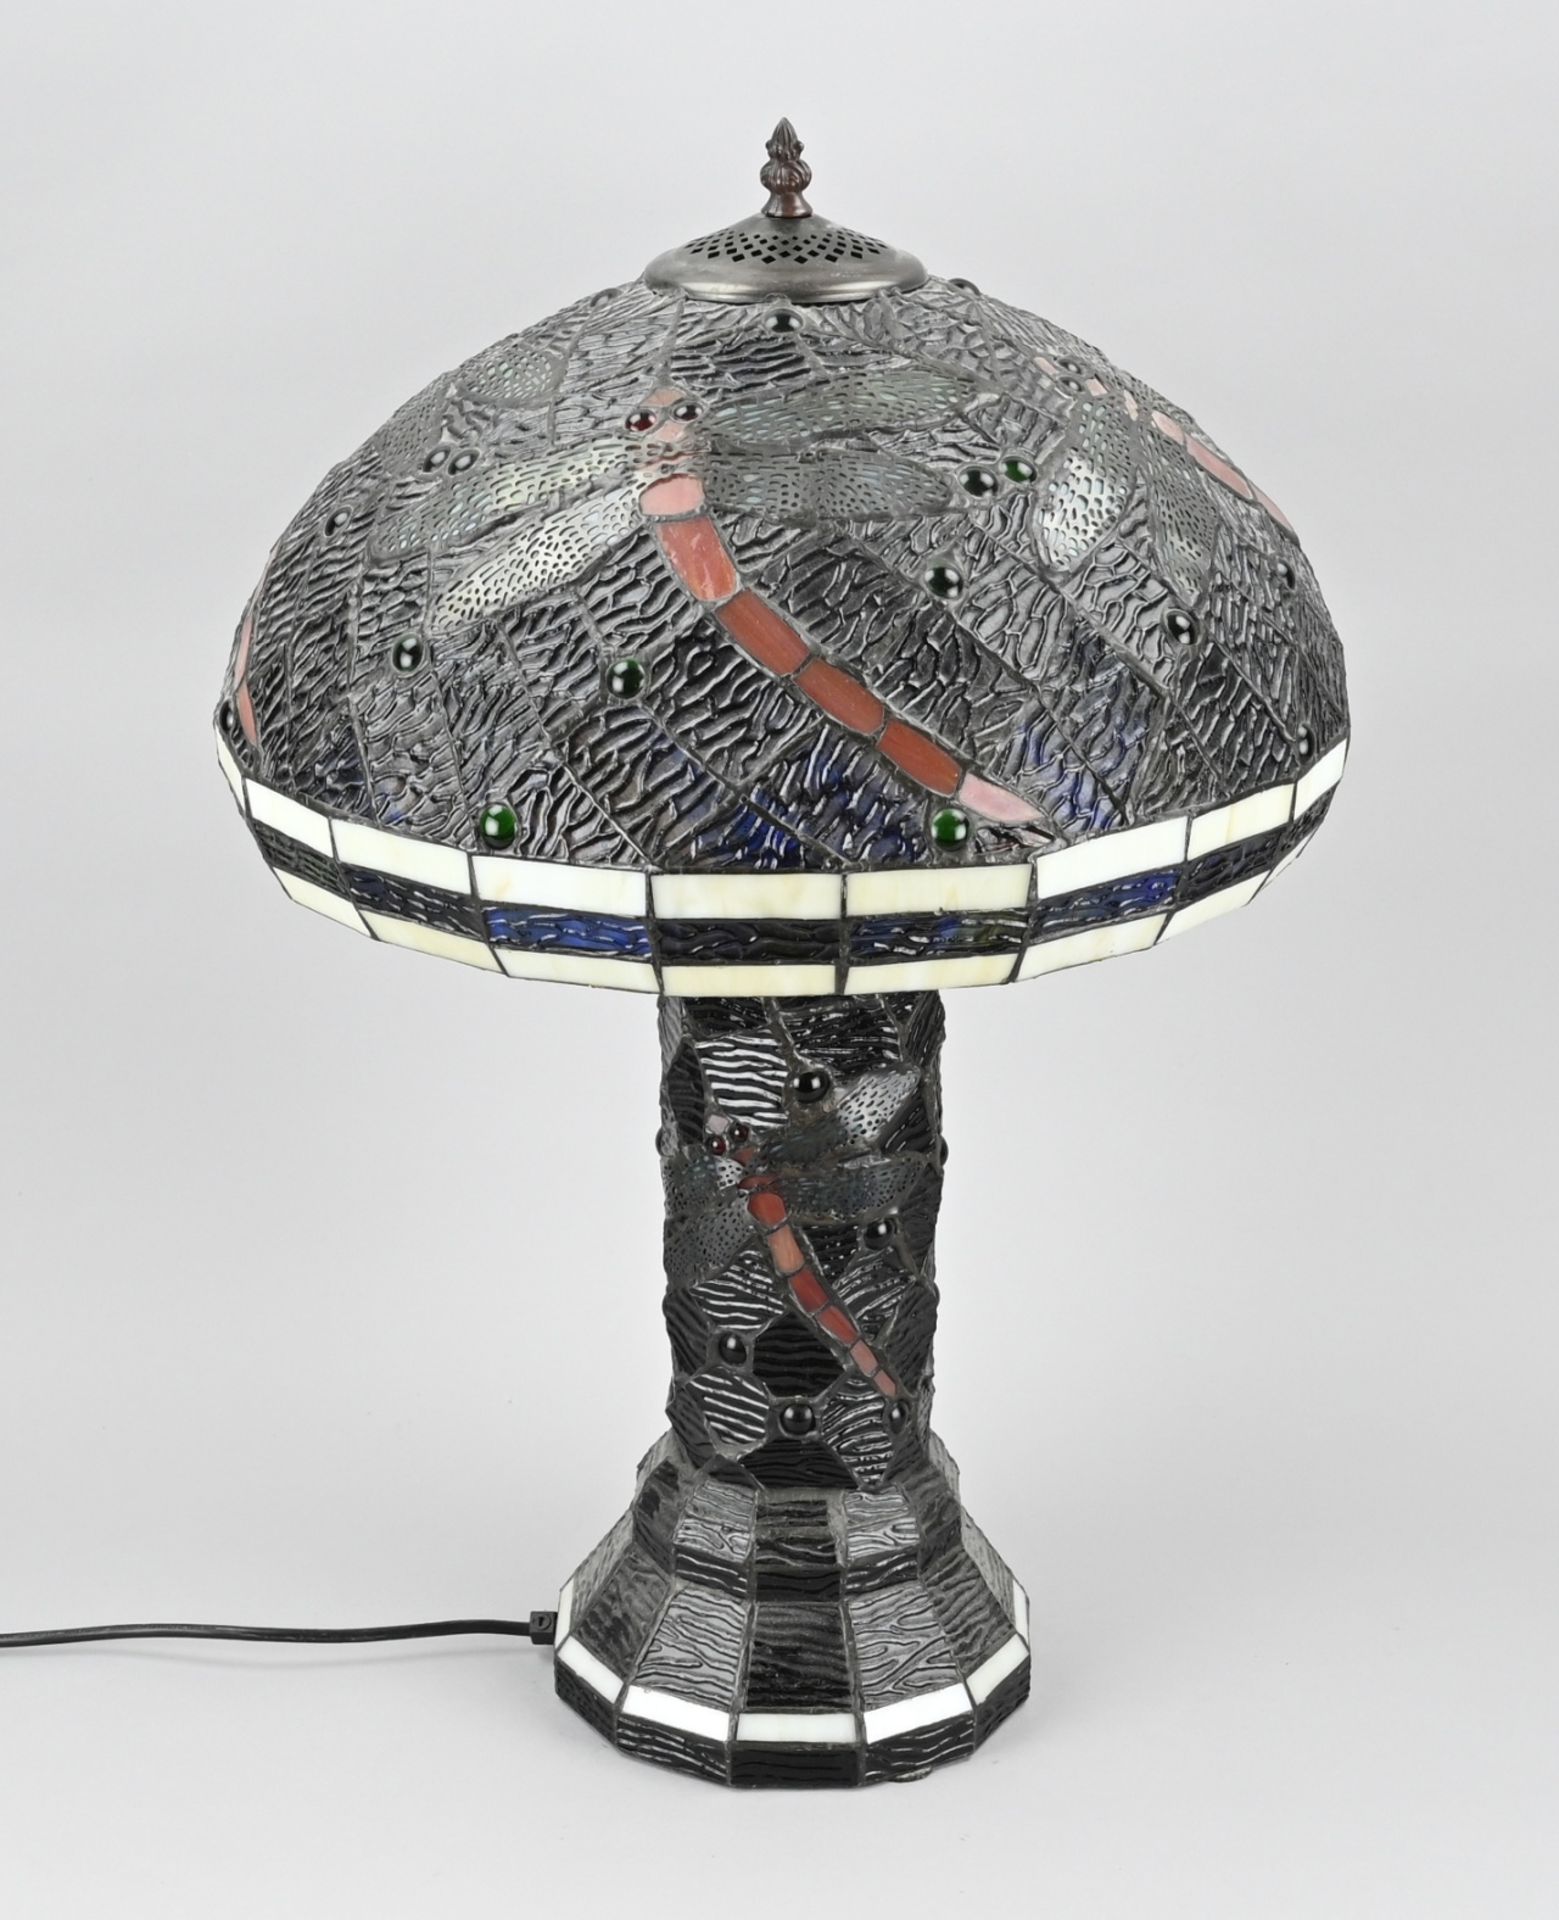 Tiffany-style table lamp, H 63 cm.